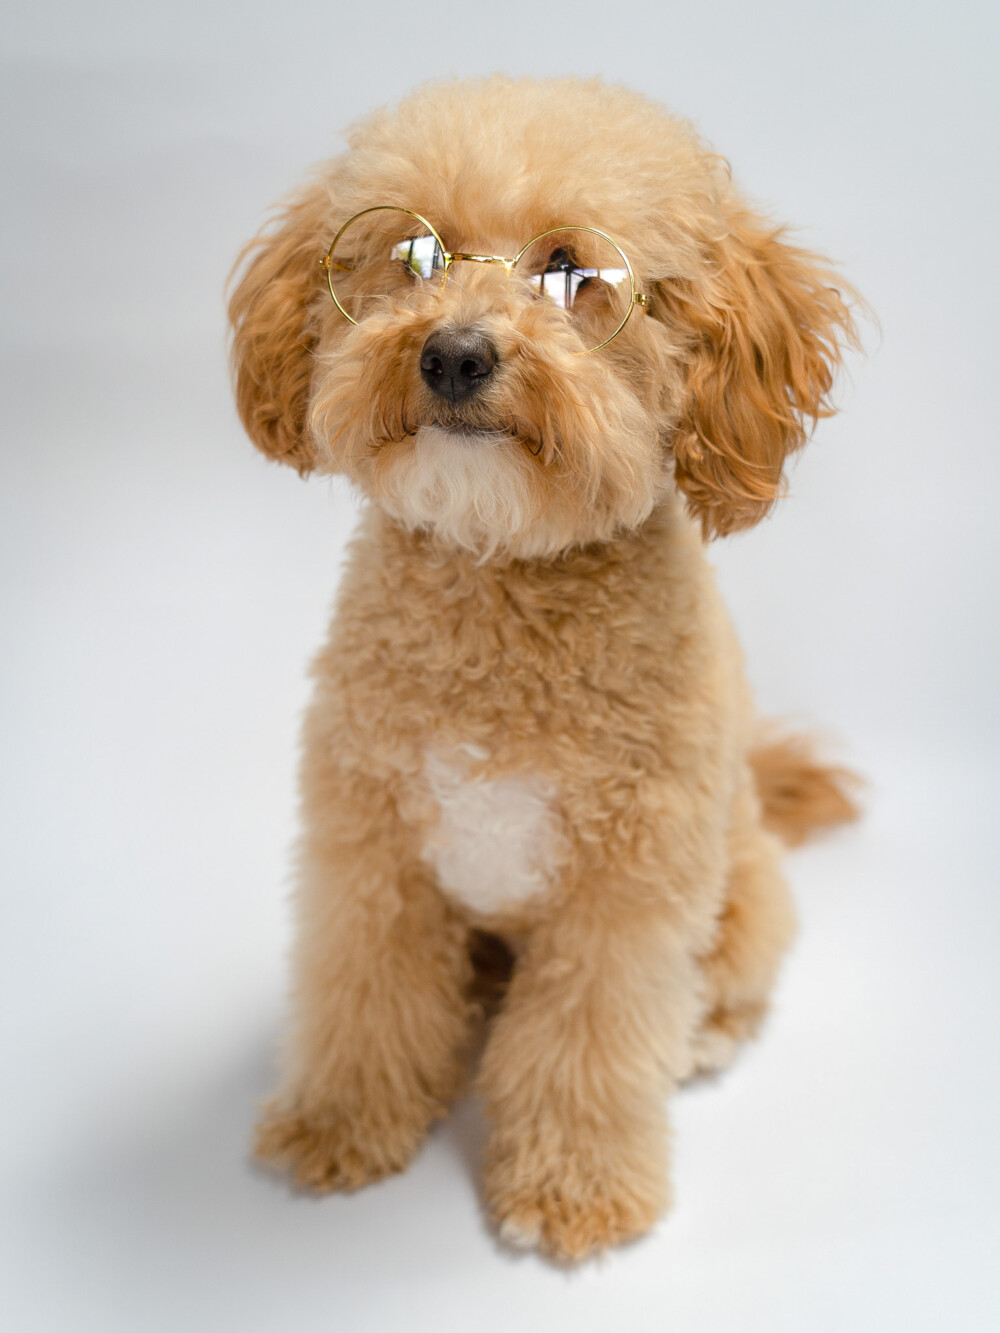 Beige fluffy dog wearing clear spectacles